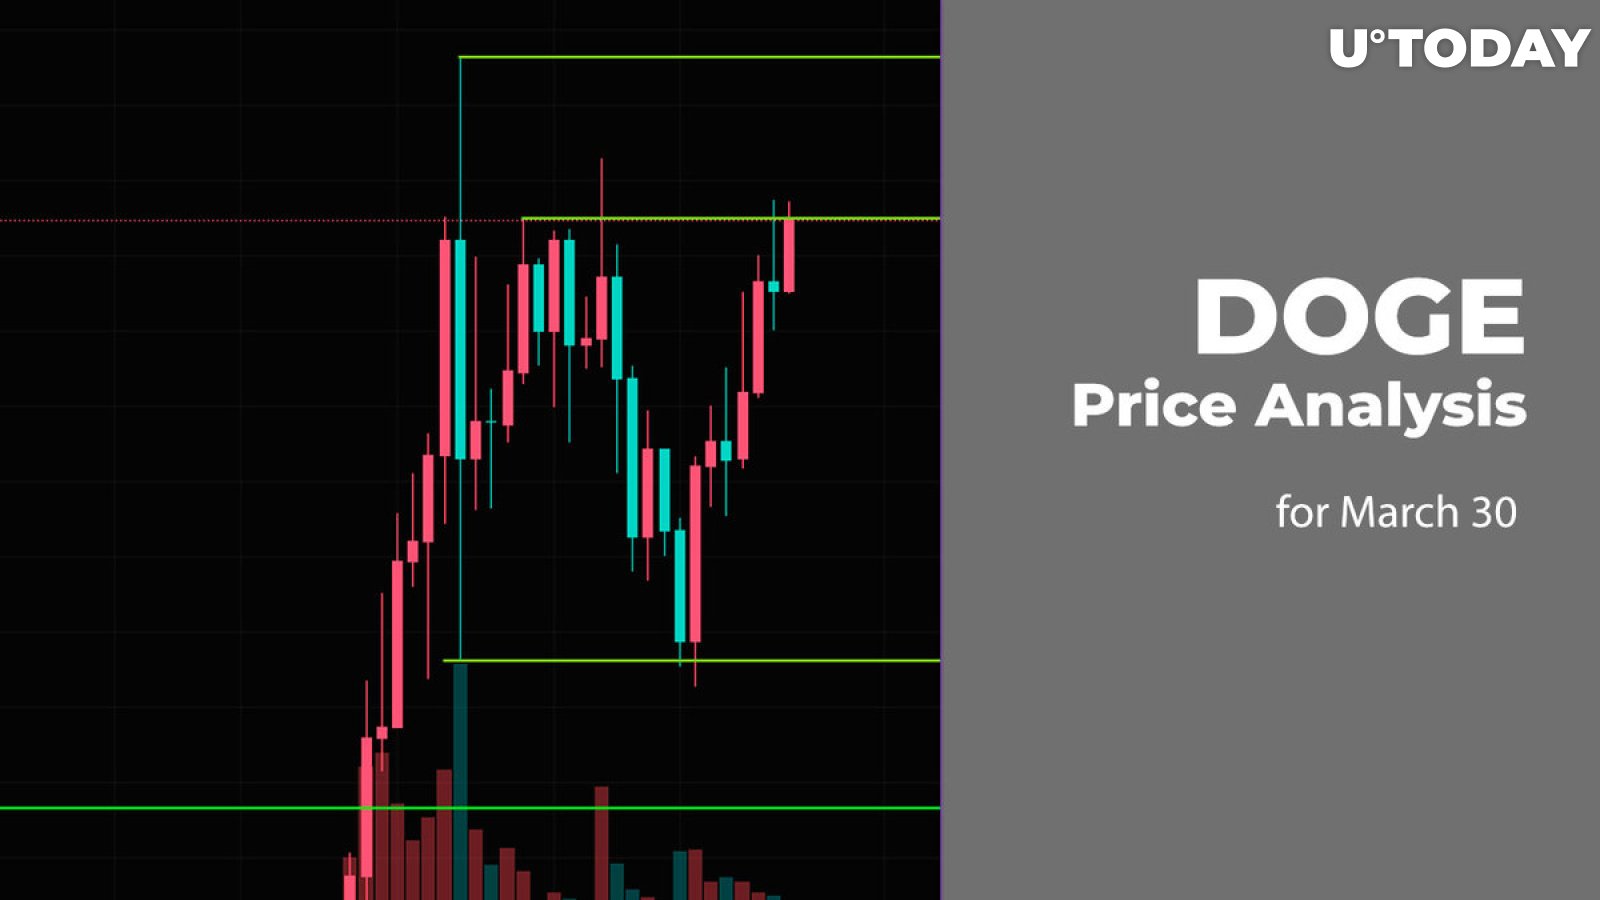 DOGE Price Prediction for March 30